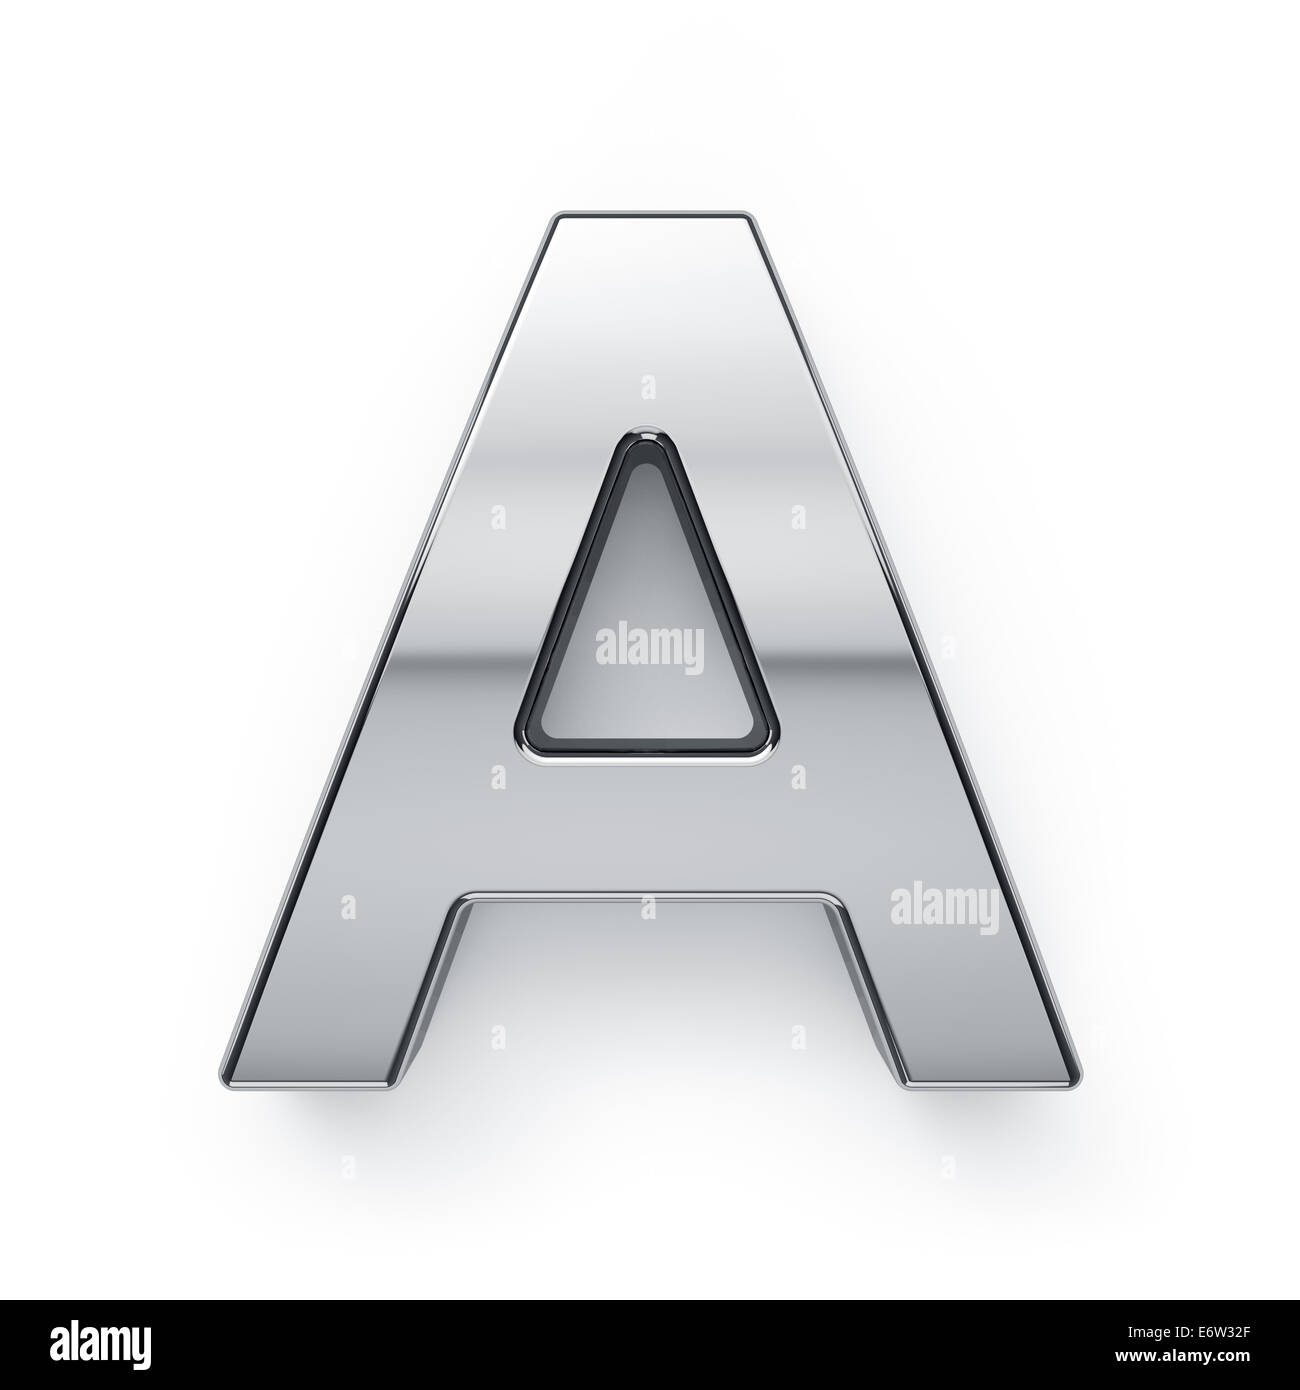 3d render of metallic alphabet letter symbol - A. Isolated on white background Stock Photo